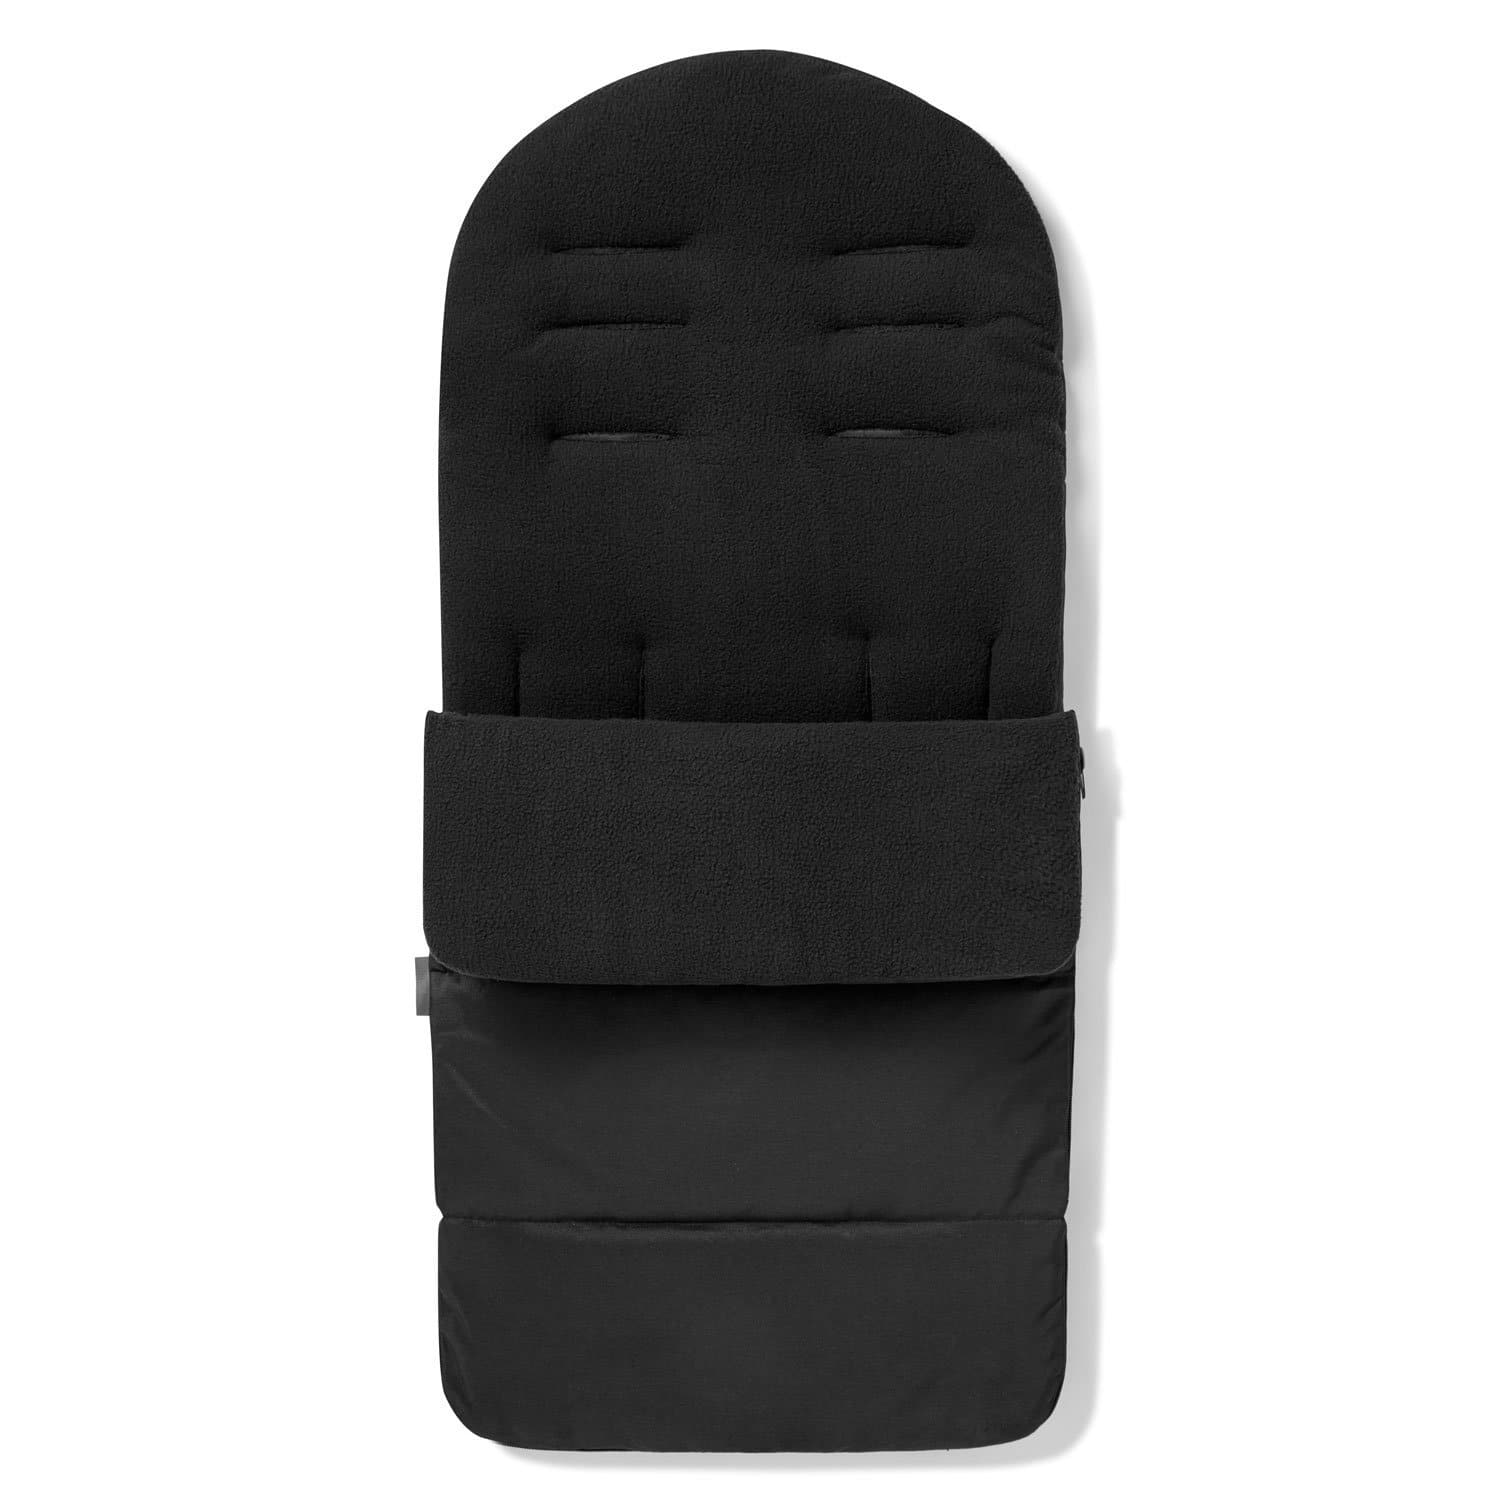 Premium Footmuff / Cosy Toes Compatible with Brio - Black Jack / Fits All Models | For Your Little One